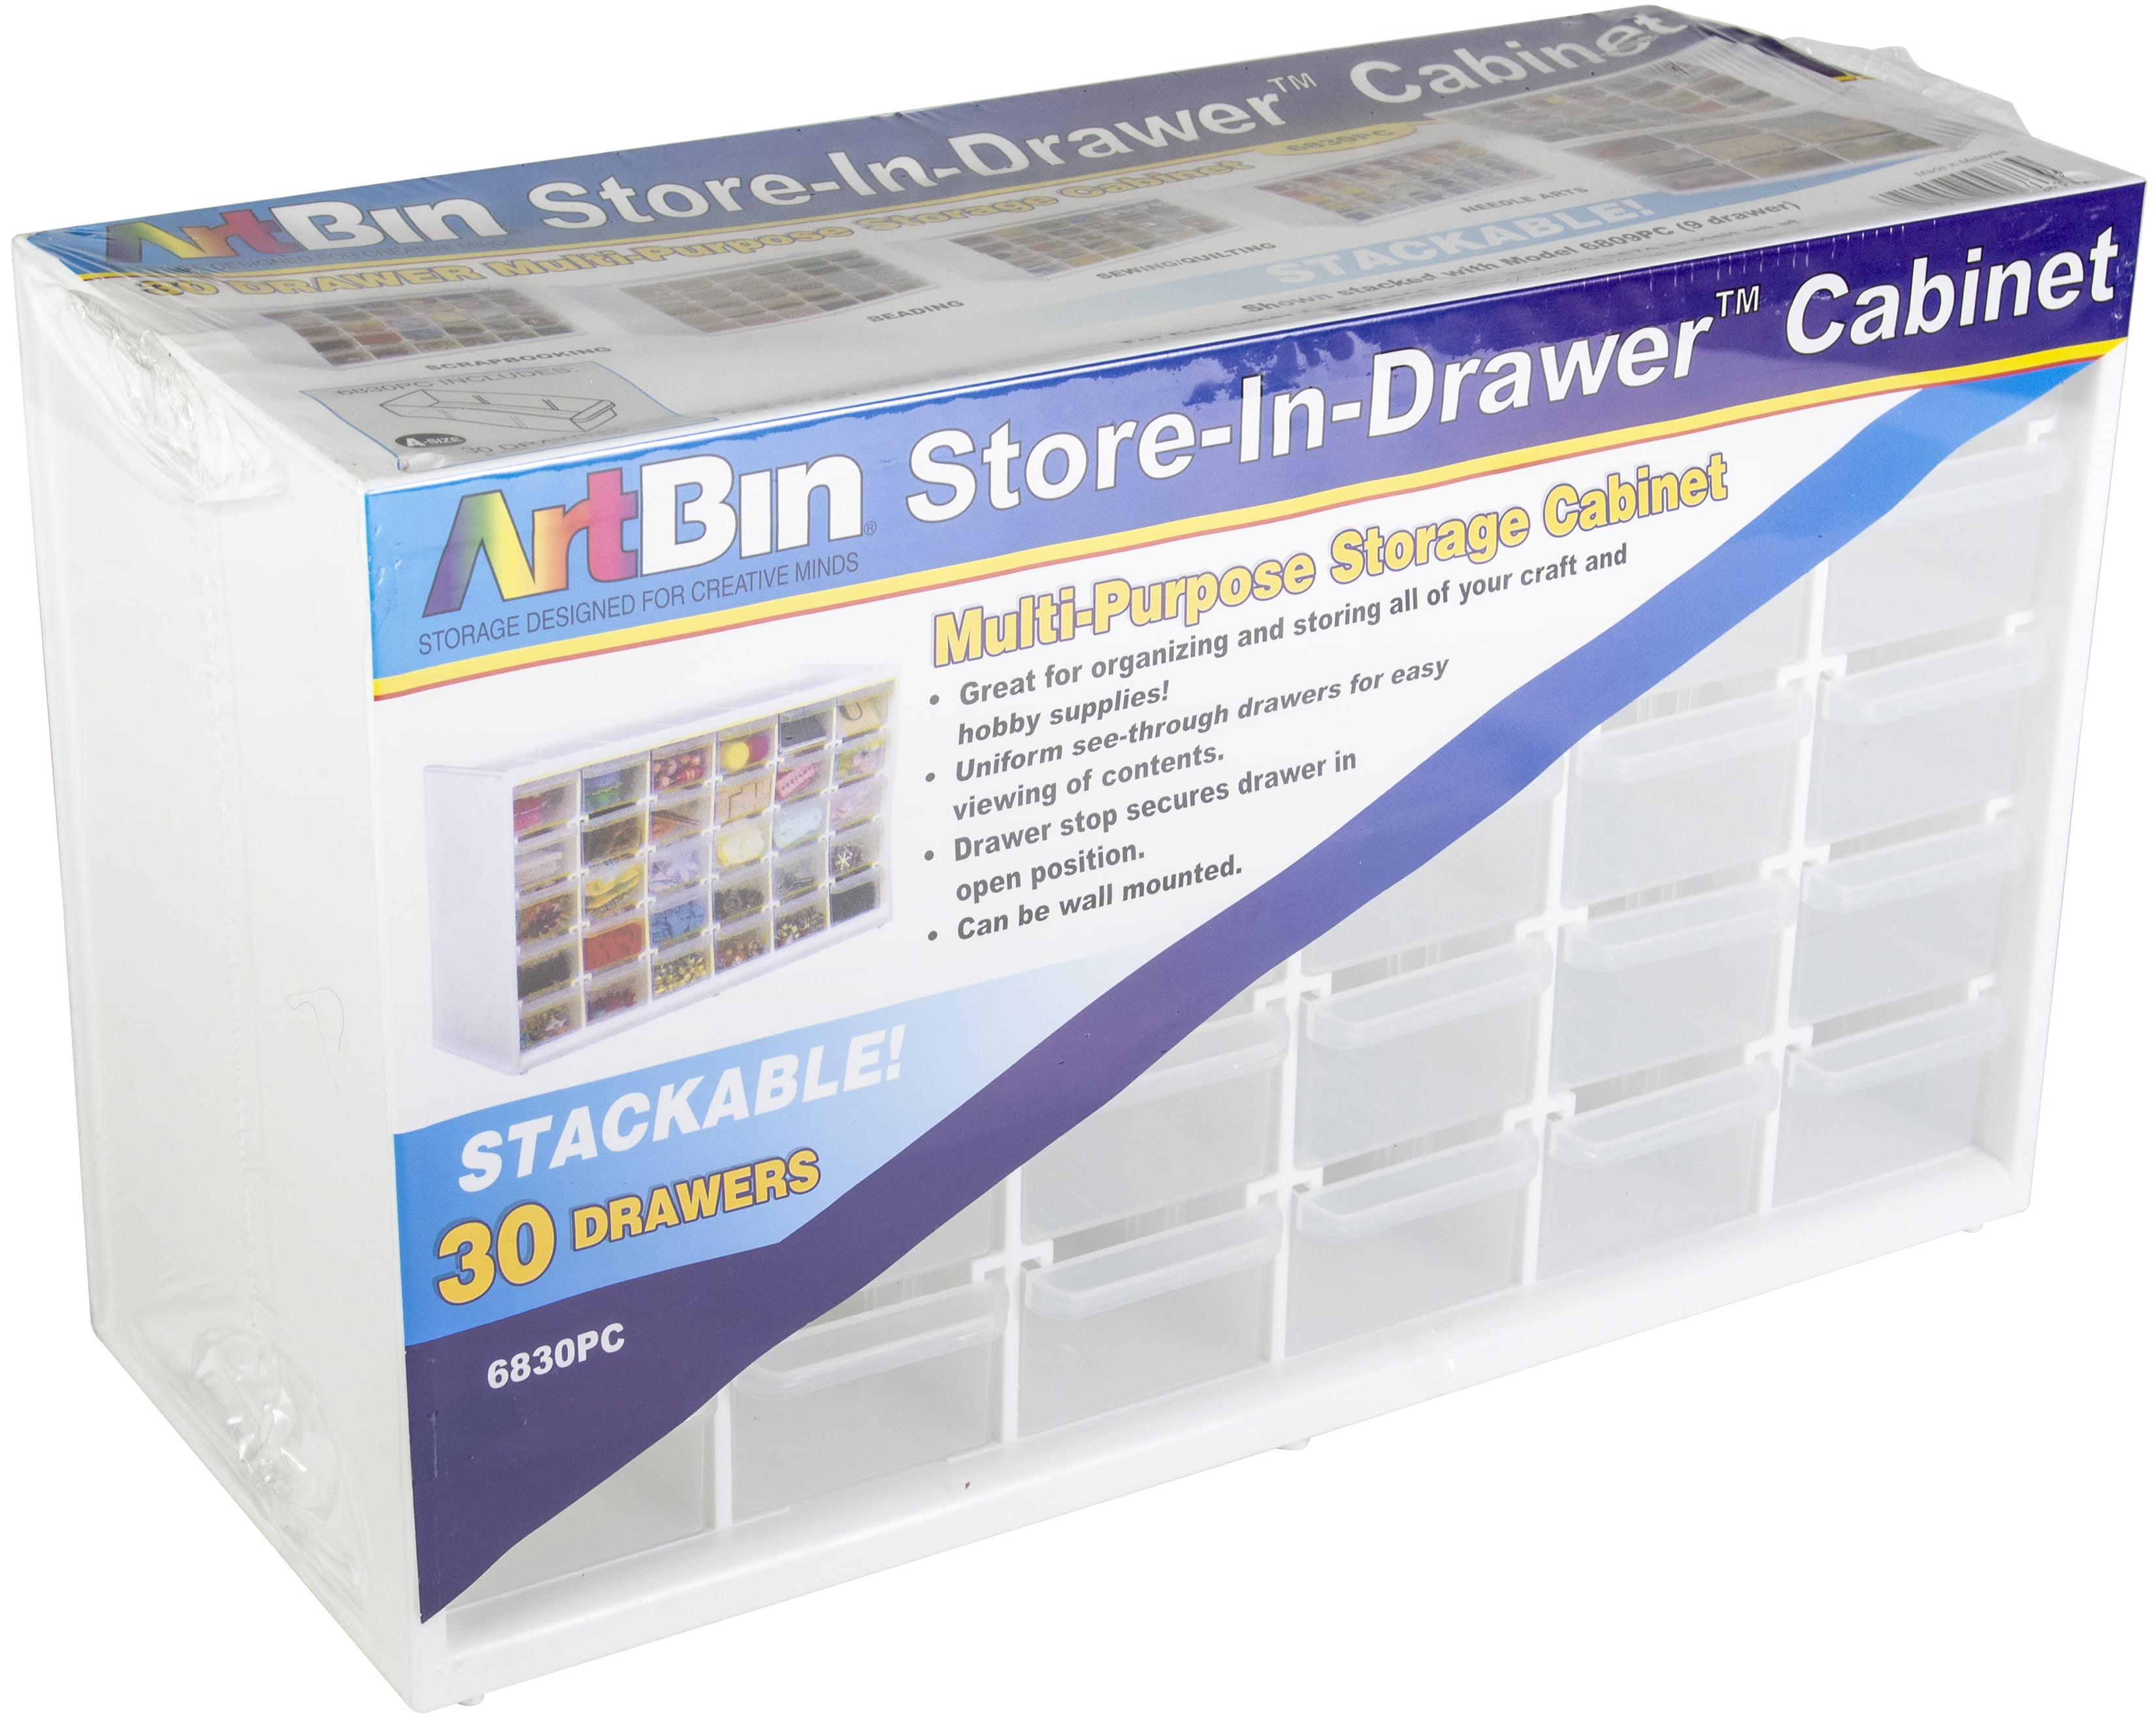 WHITE ARTBIN SOLUTIONS CABINET STORAGE BOX case removable trays hobbie crafts 